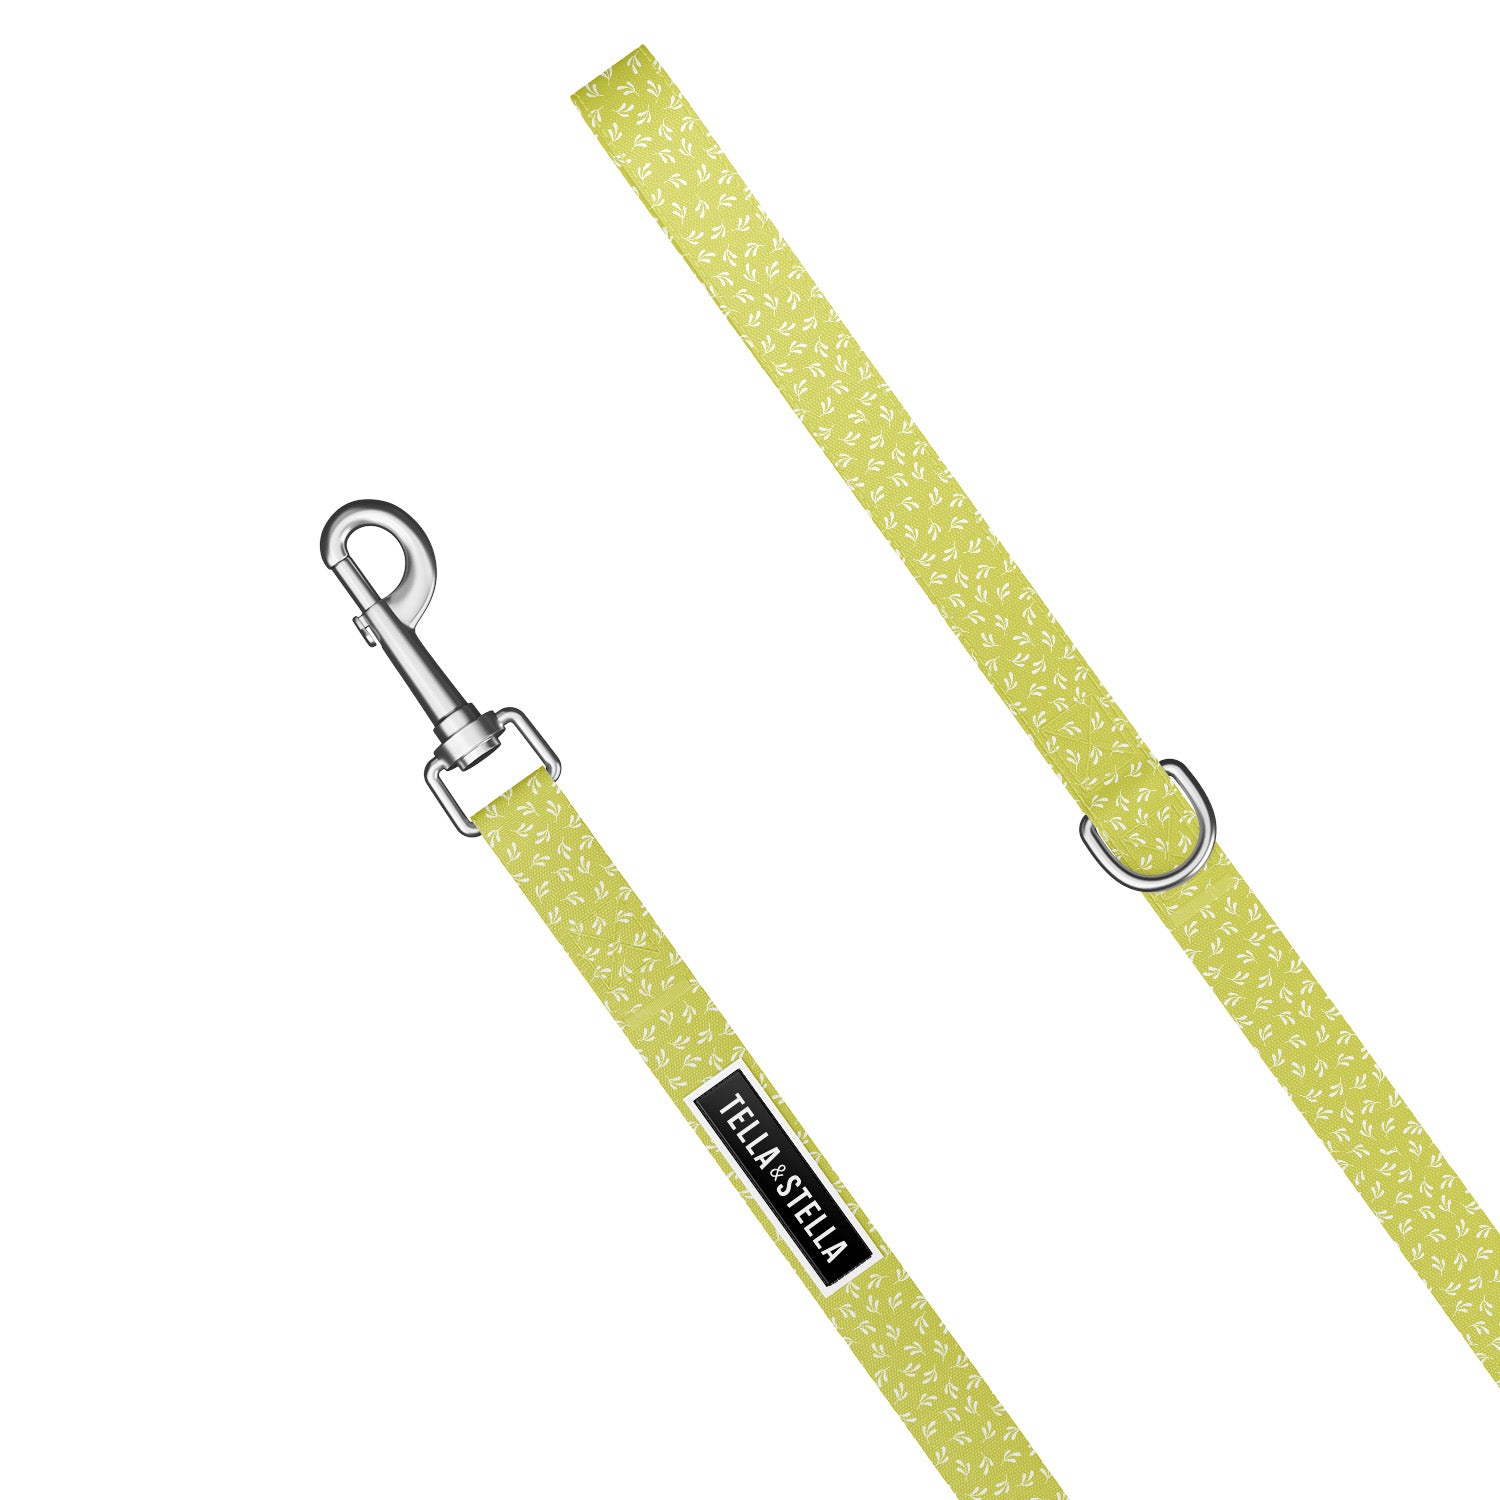 Lucy dog combo collar and leash